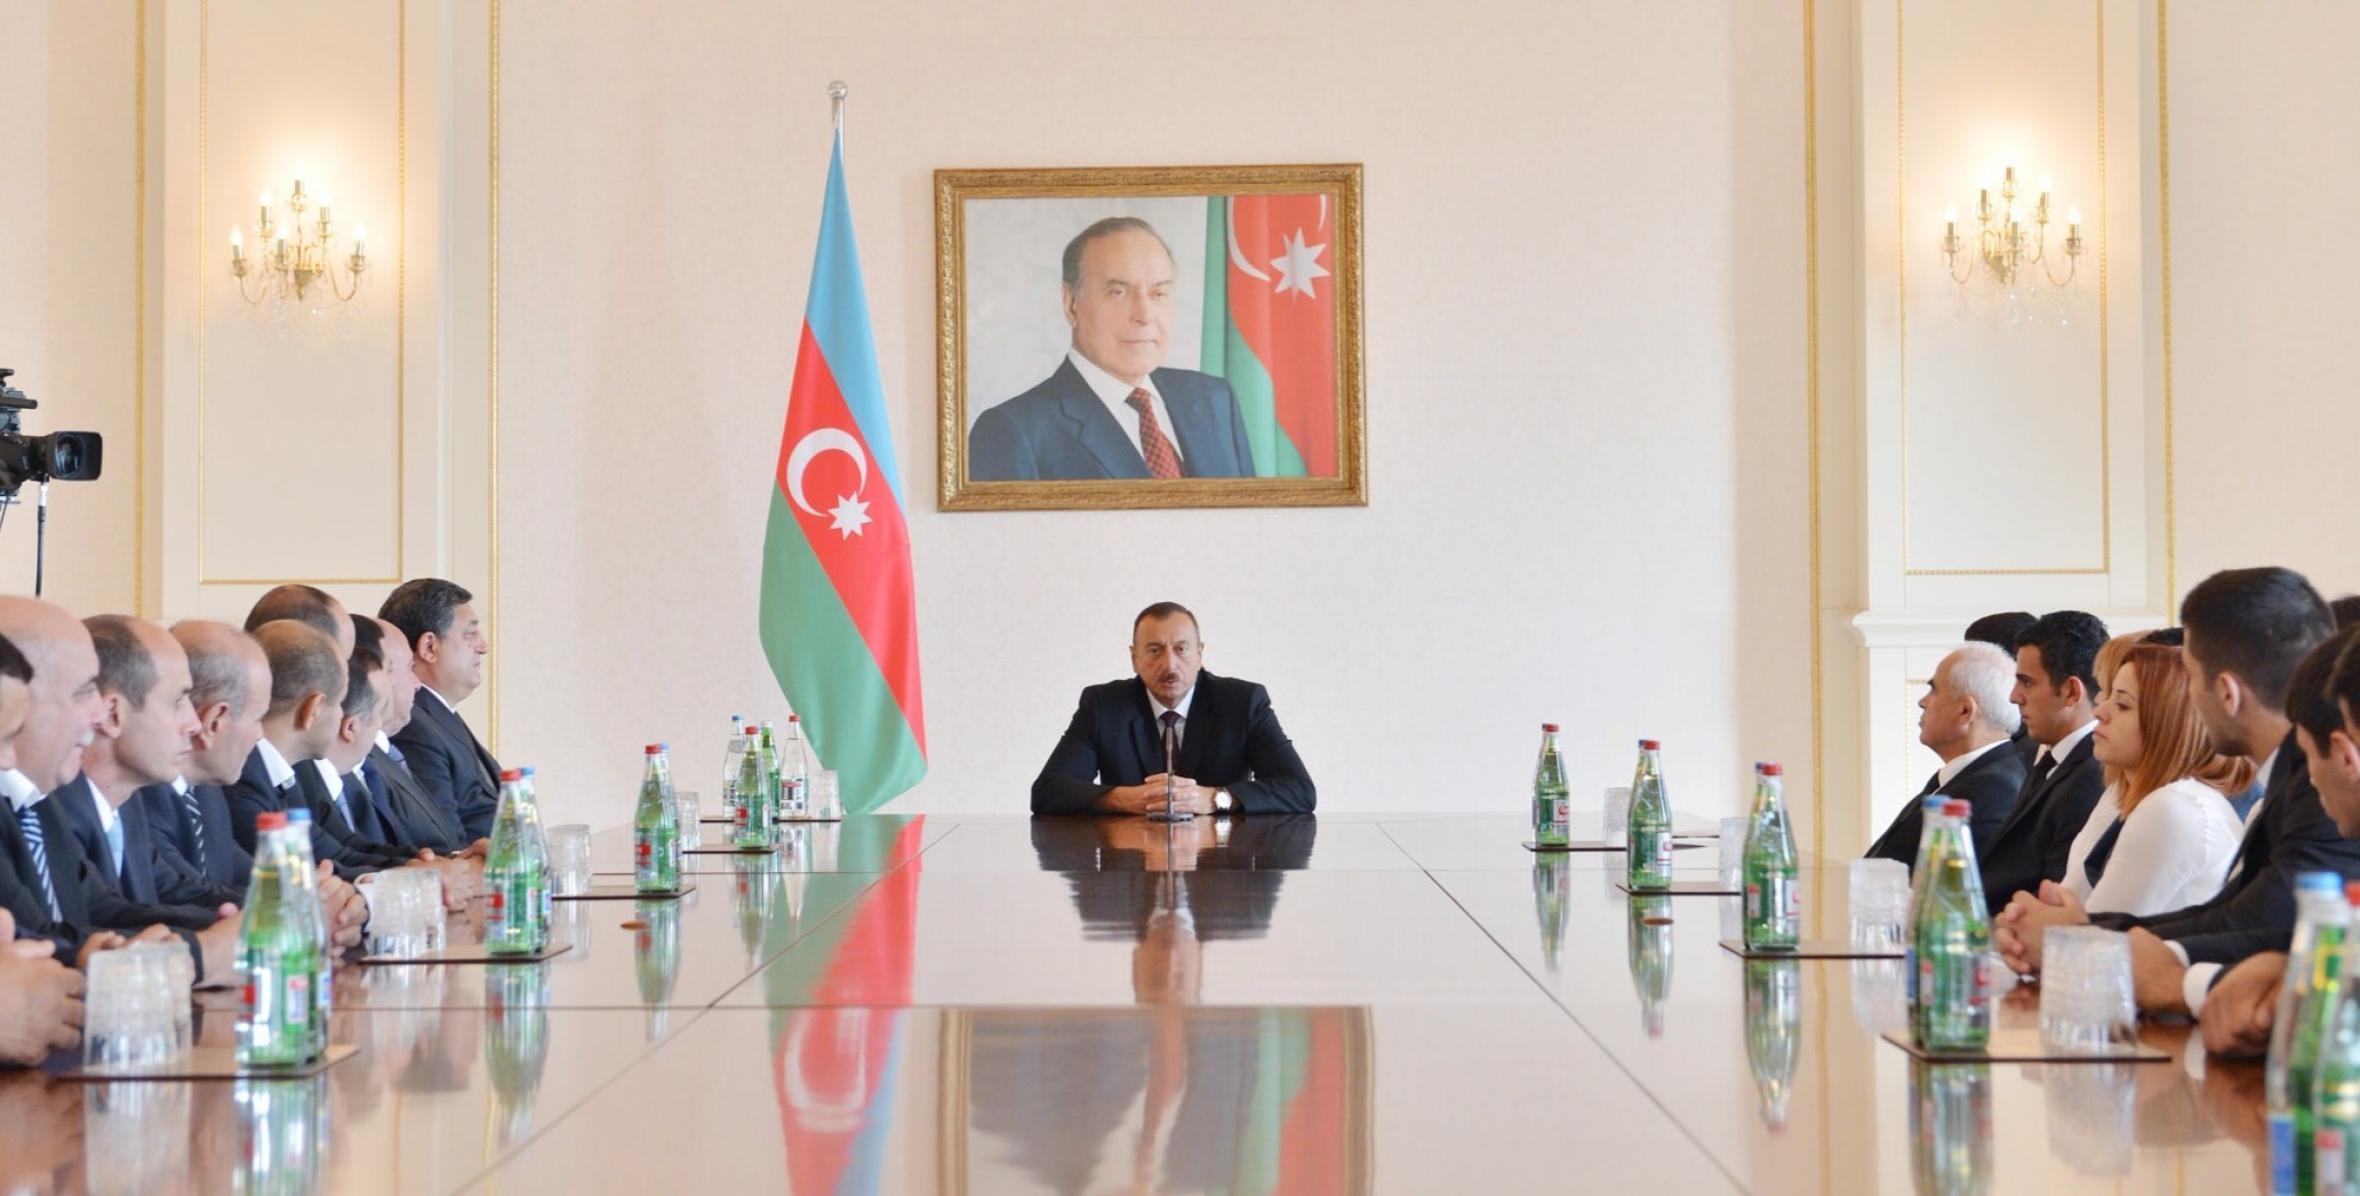 Ilham Aliyev received winners and prize-winners in the 27th Summer Universiade in Kazan, as well as their coaches and sports professionals of the republic